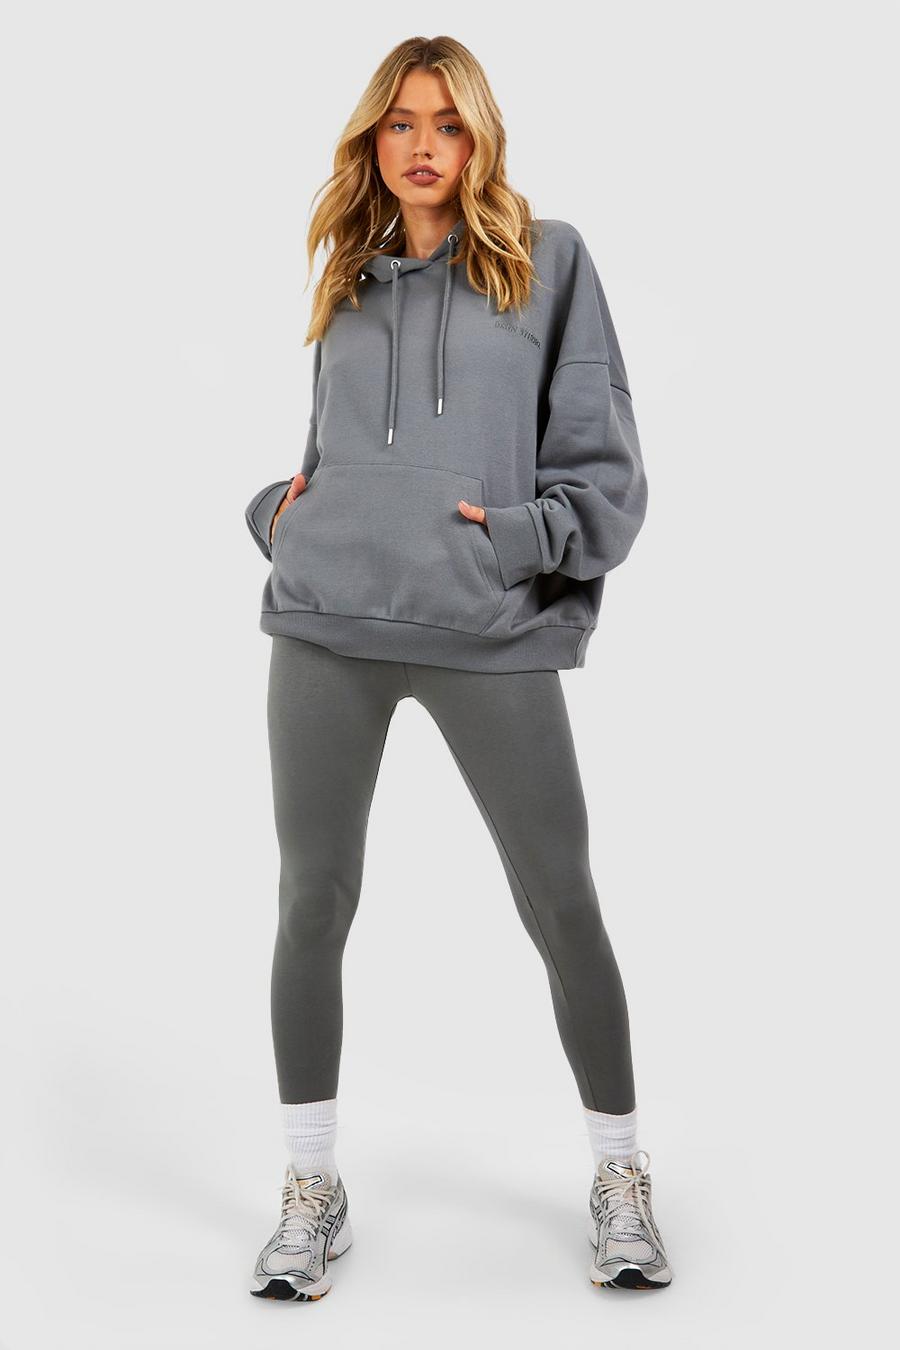 Charcoal Dsgn Studio Oversized Hoodie And Legging Tracksuit